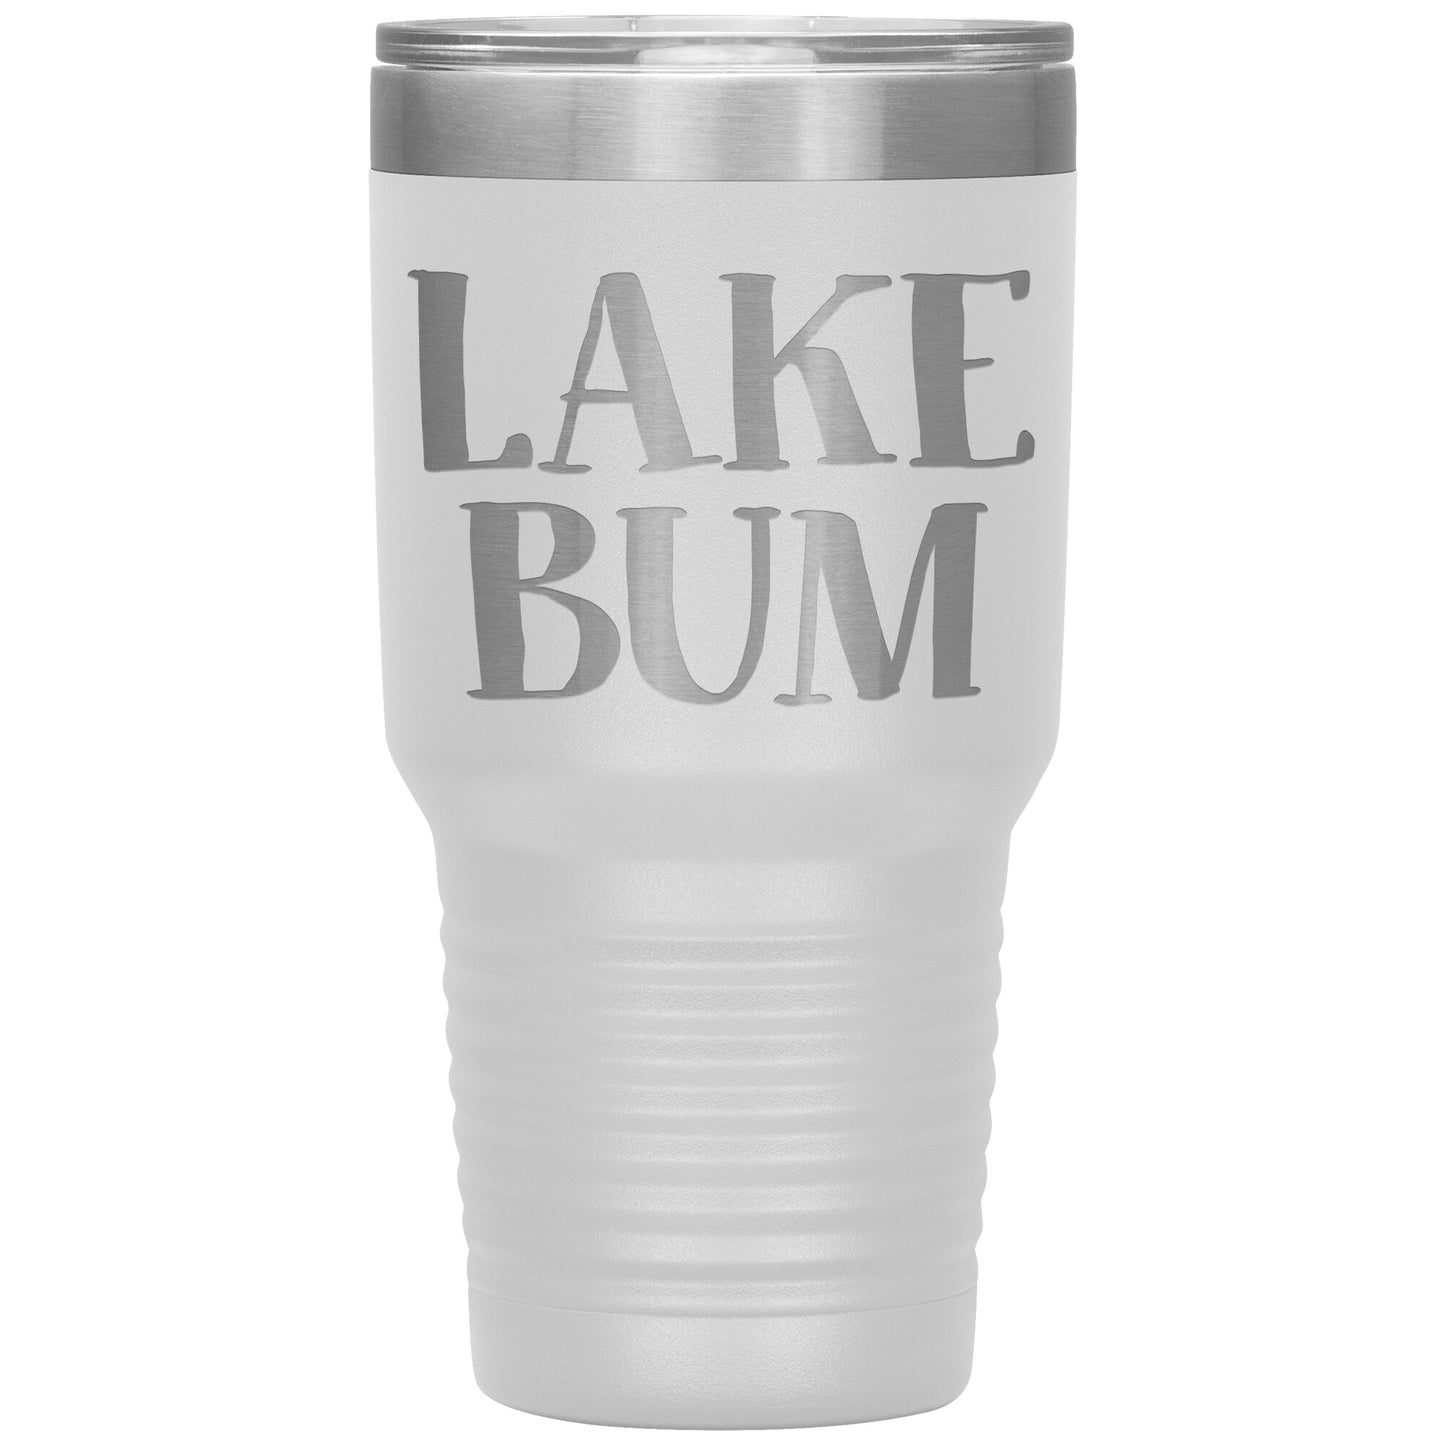 Lake Bum Drink Tumbler - Funny Insulated Cup with Lid